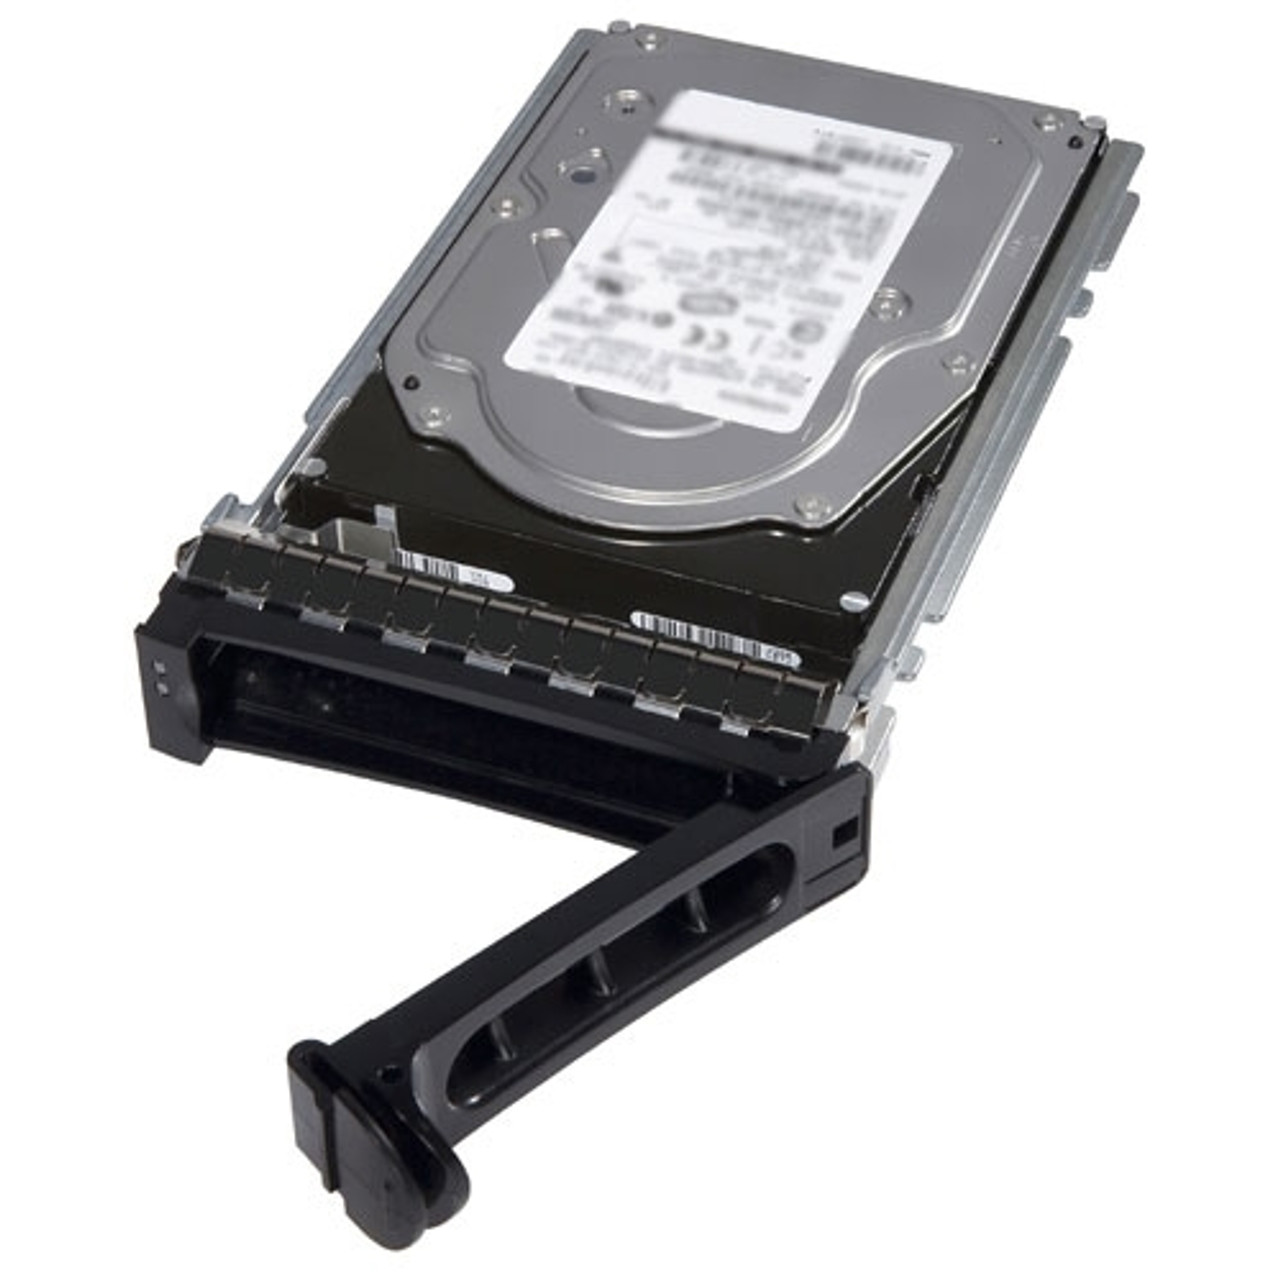 DELL 7NP9P 1tb 7200rpm Sata-6gbps 2.5inch Hot-swap Hard Drive With Tray For Poweredge Server